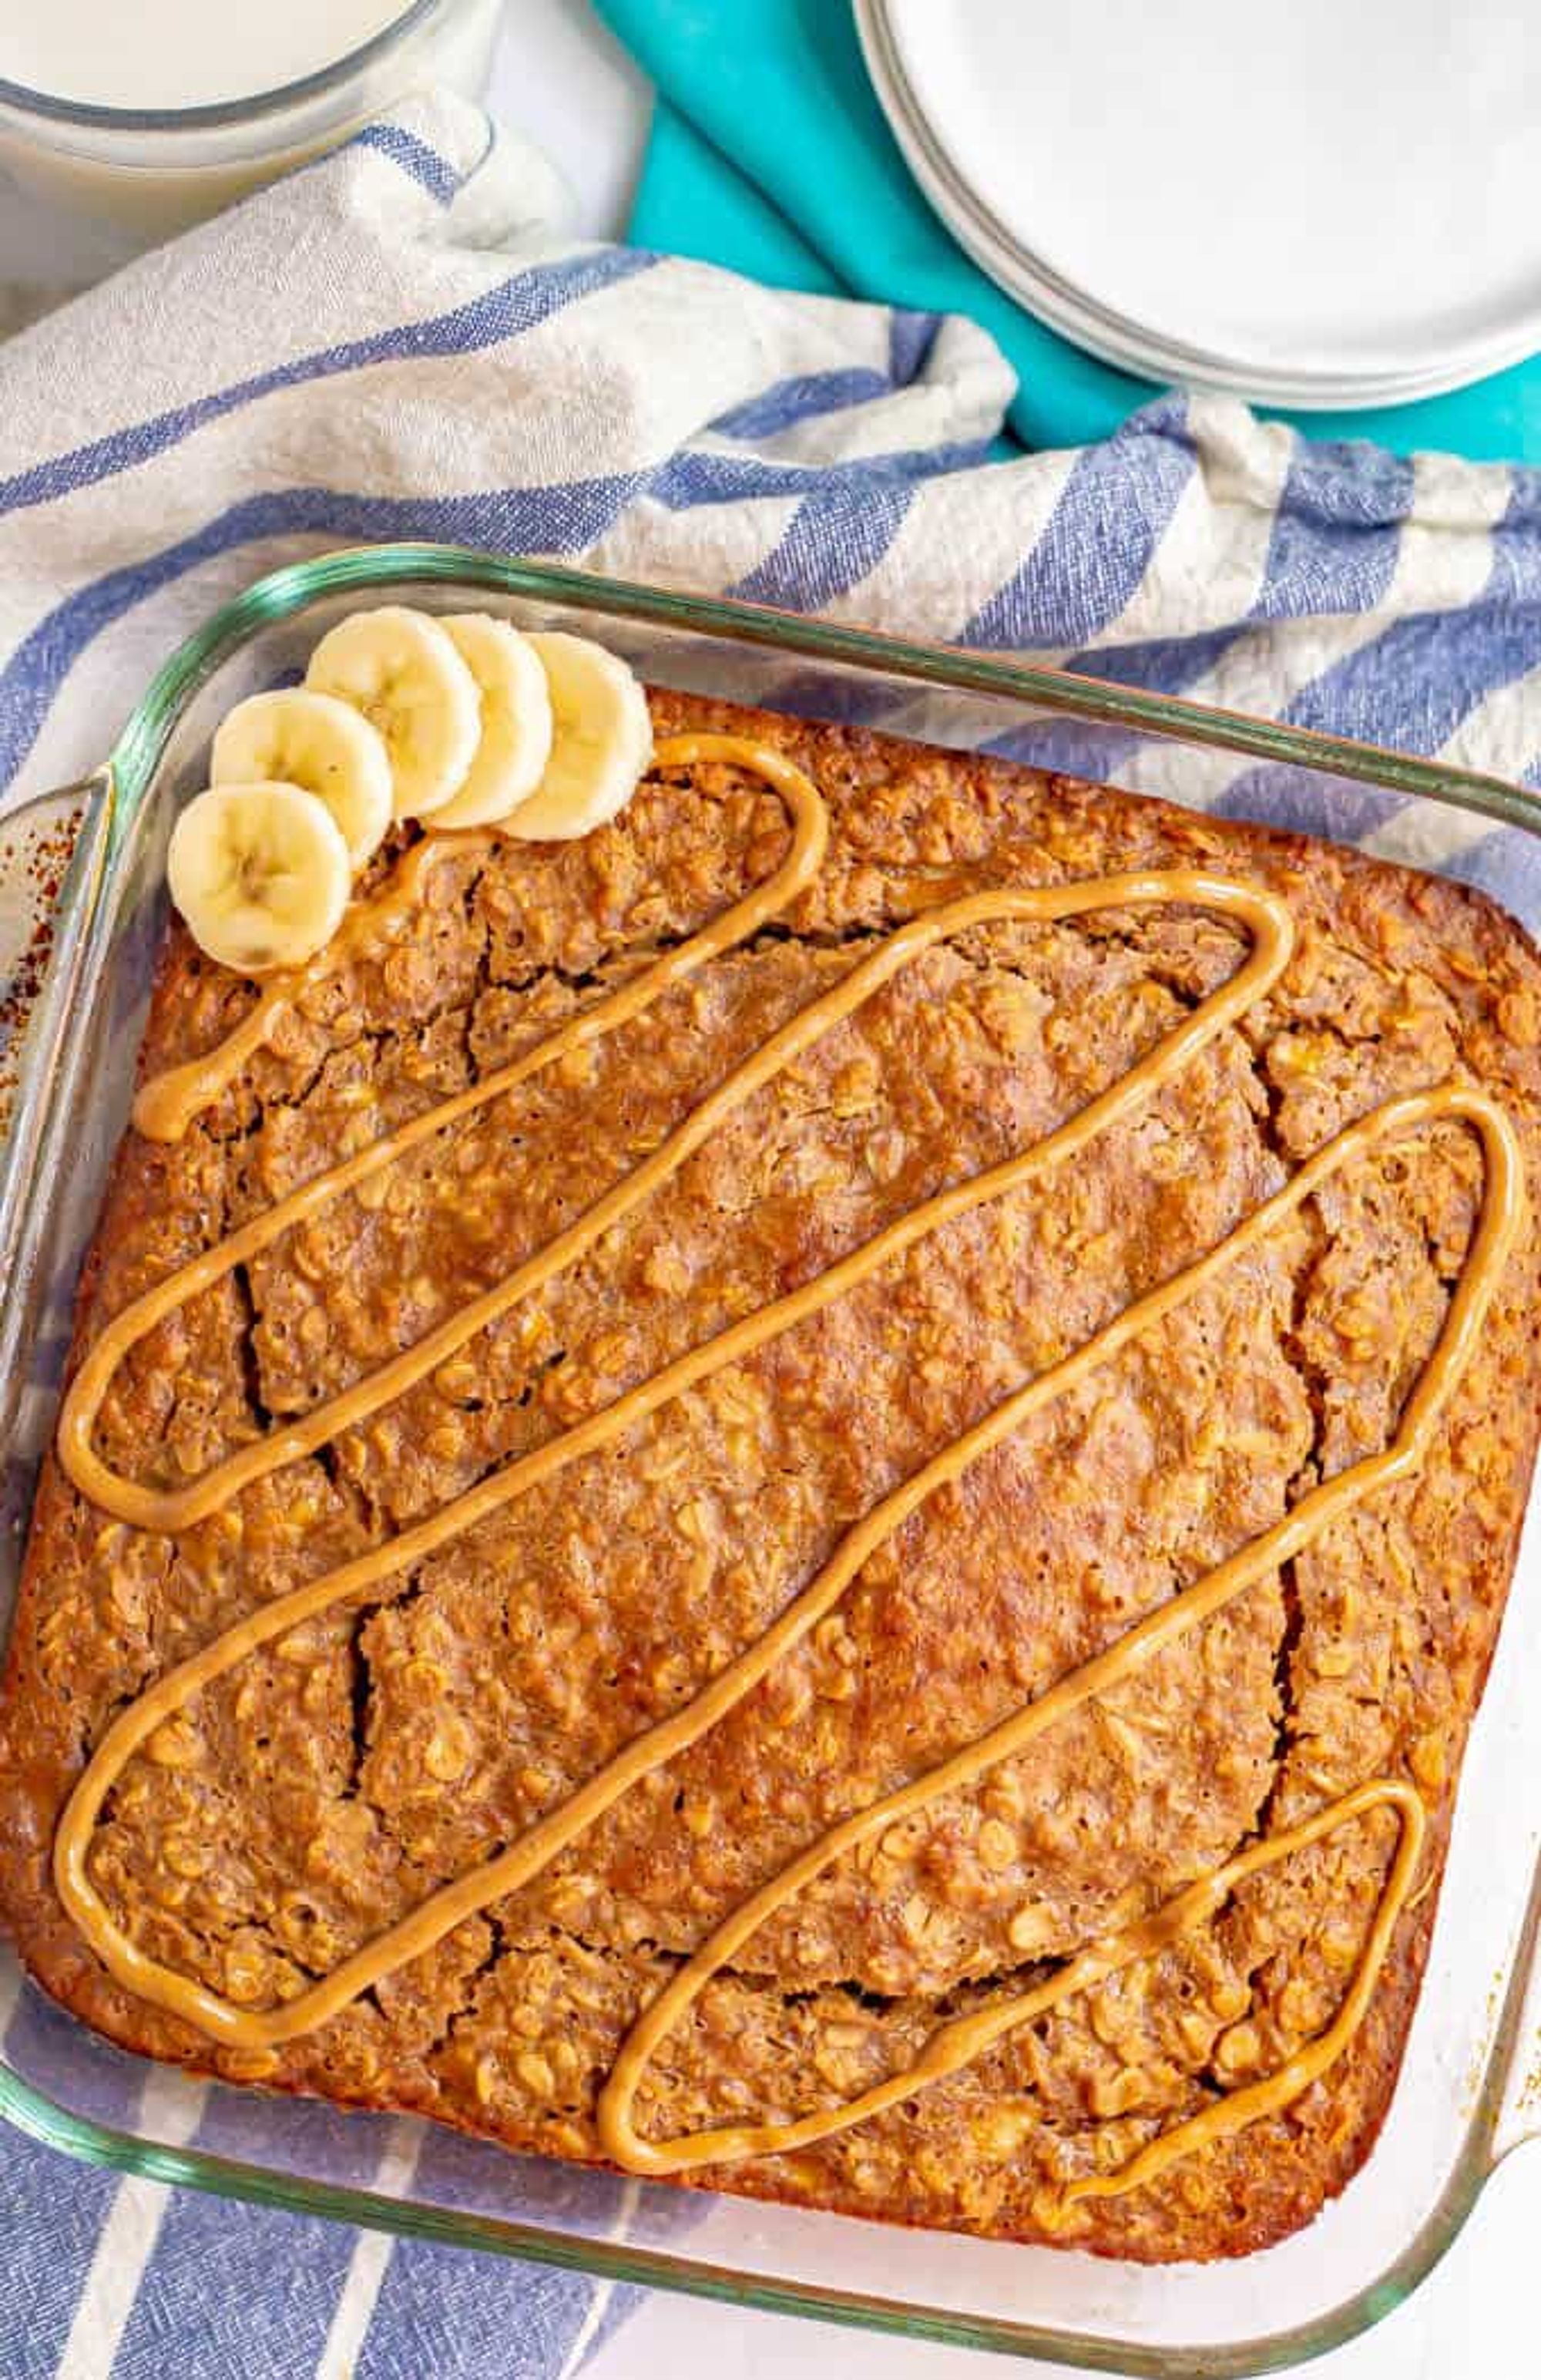 Peanut butter banana baked oatmeal - Family Food on the Table - My